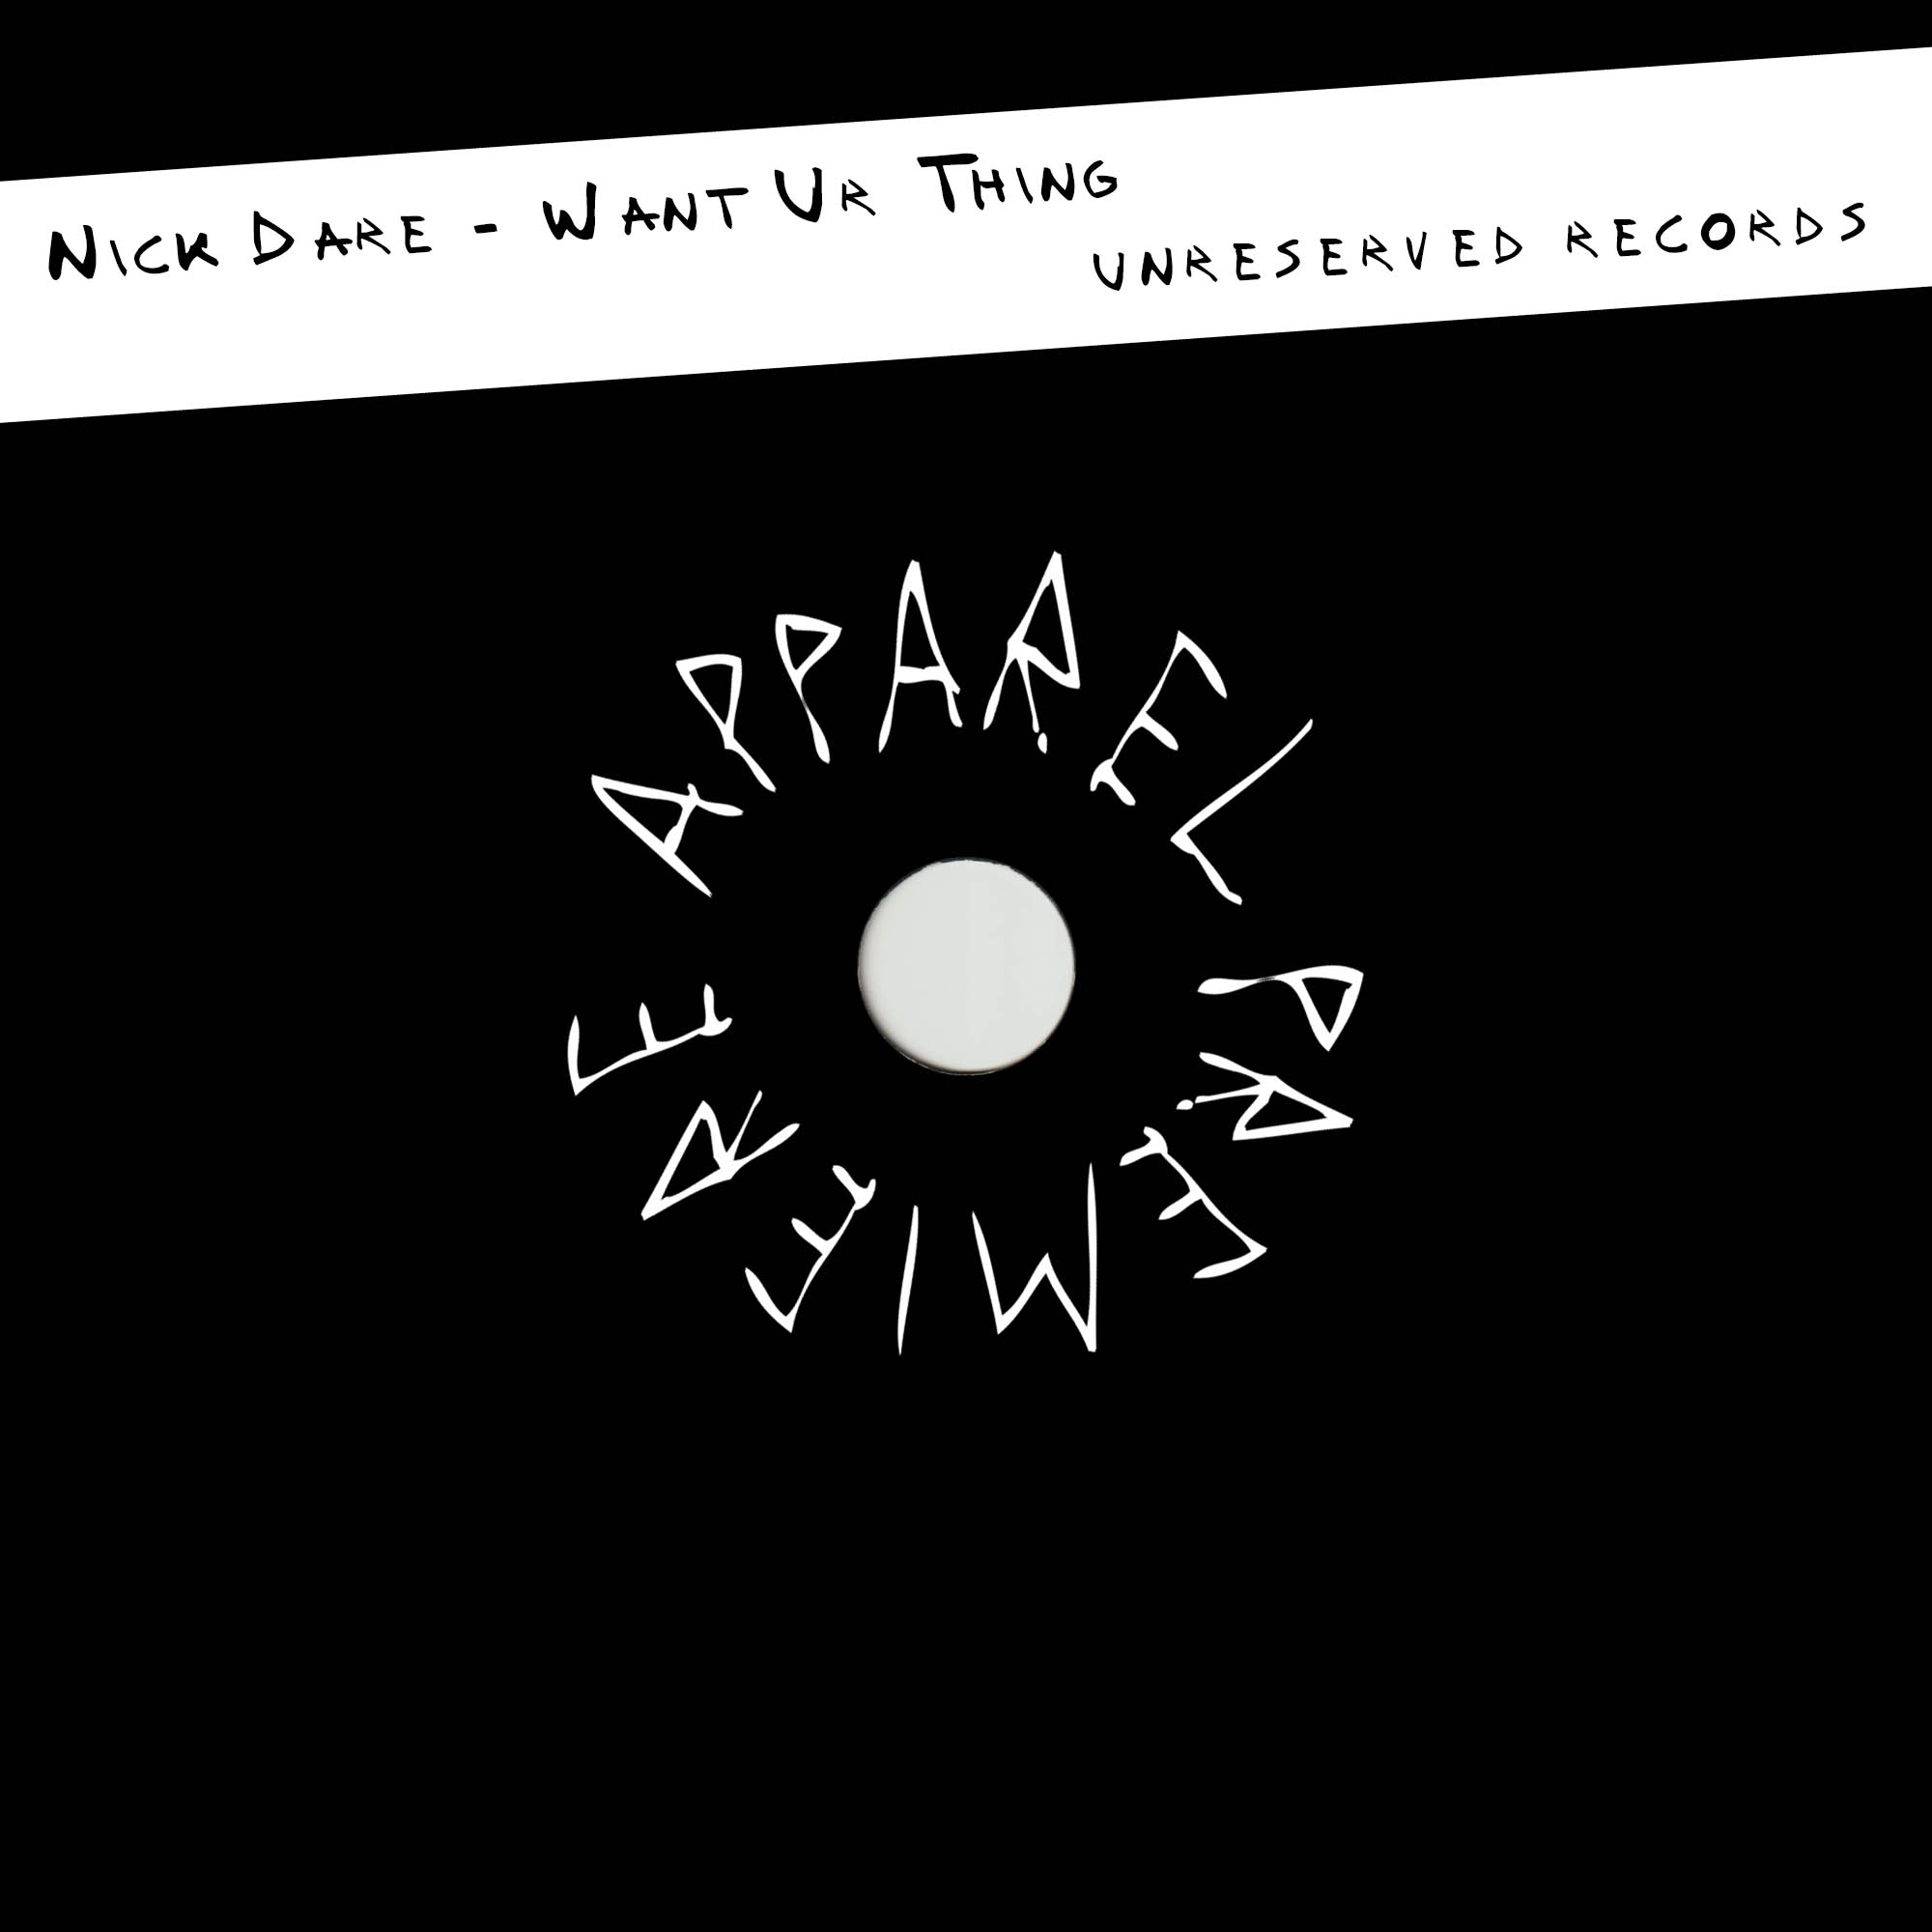 APPAREL PREMIERE Nick Dare – Want Ur Thing [Unreserved Records]